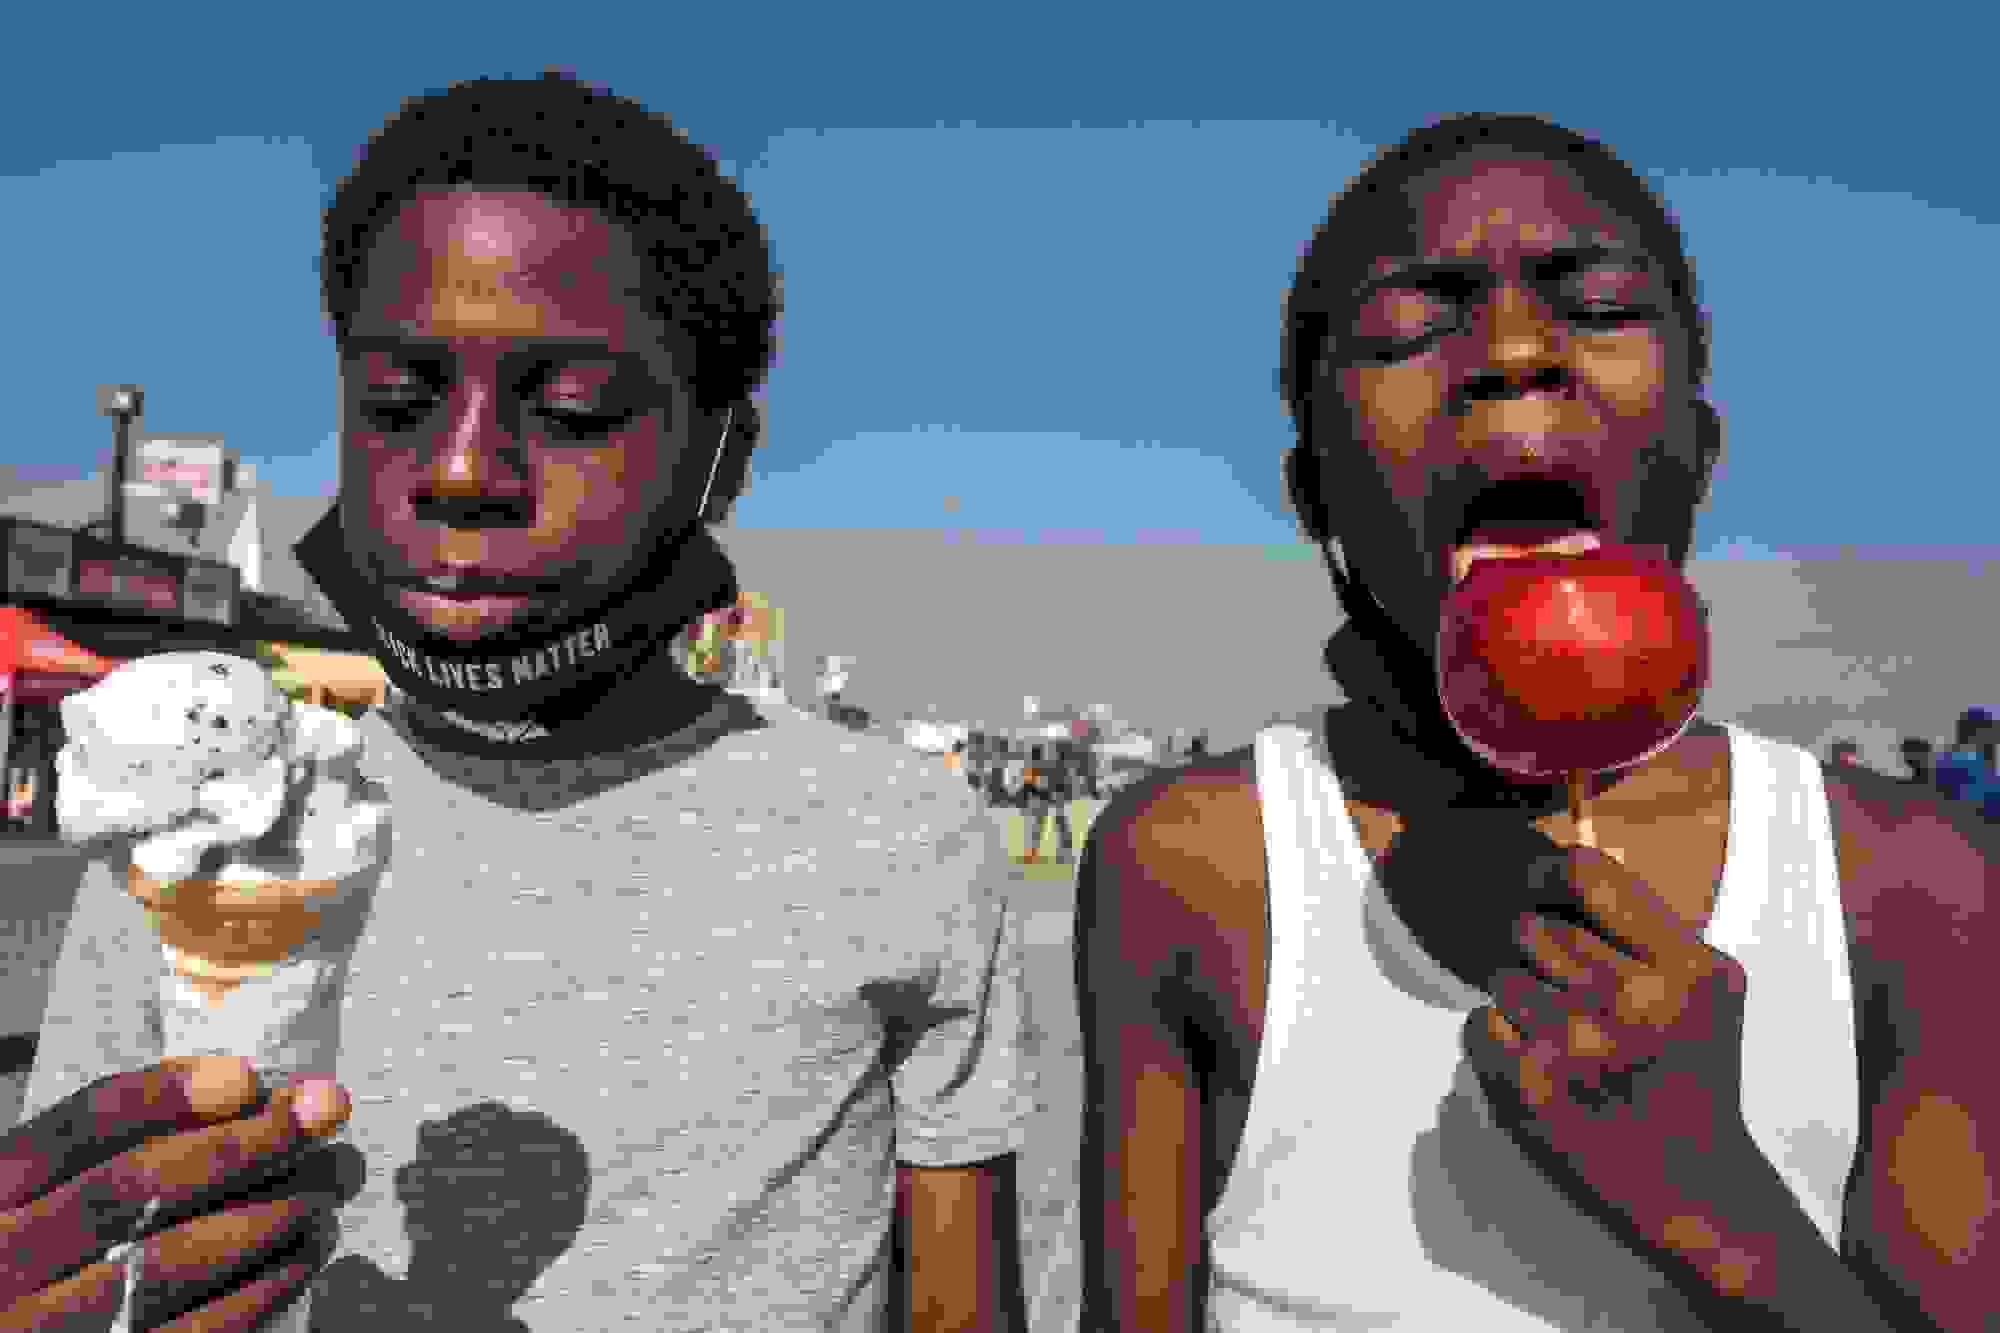 A street photograph on a boardwalk on a sunny day. Taking up the foreground are two young Black men side by side. The one on the left is looking down at the ice cream cone he is holding. The one on the right is in mid-bite of a red candy apple.